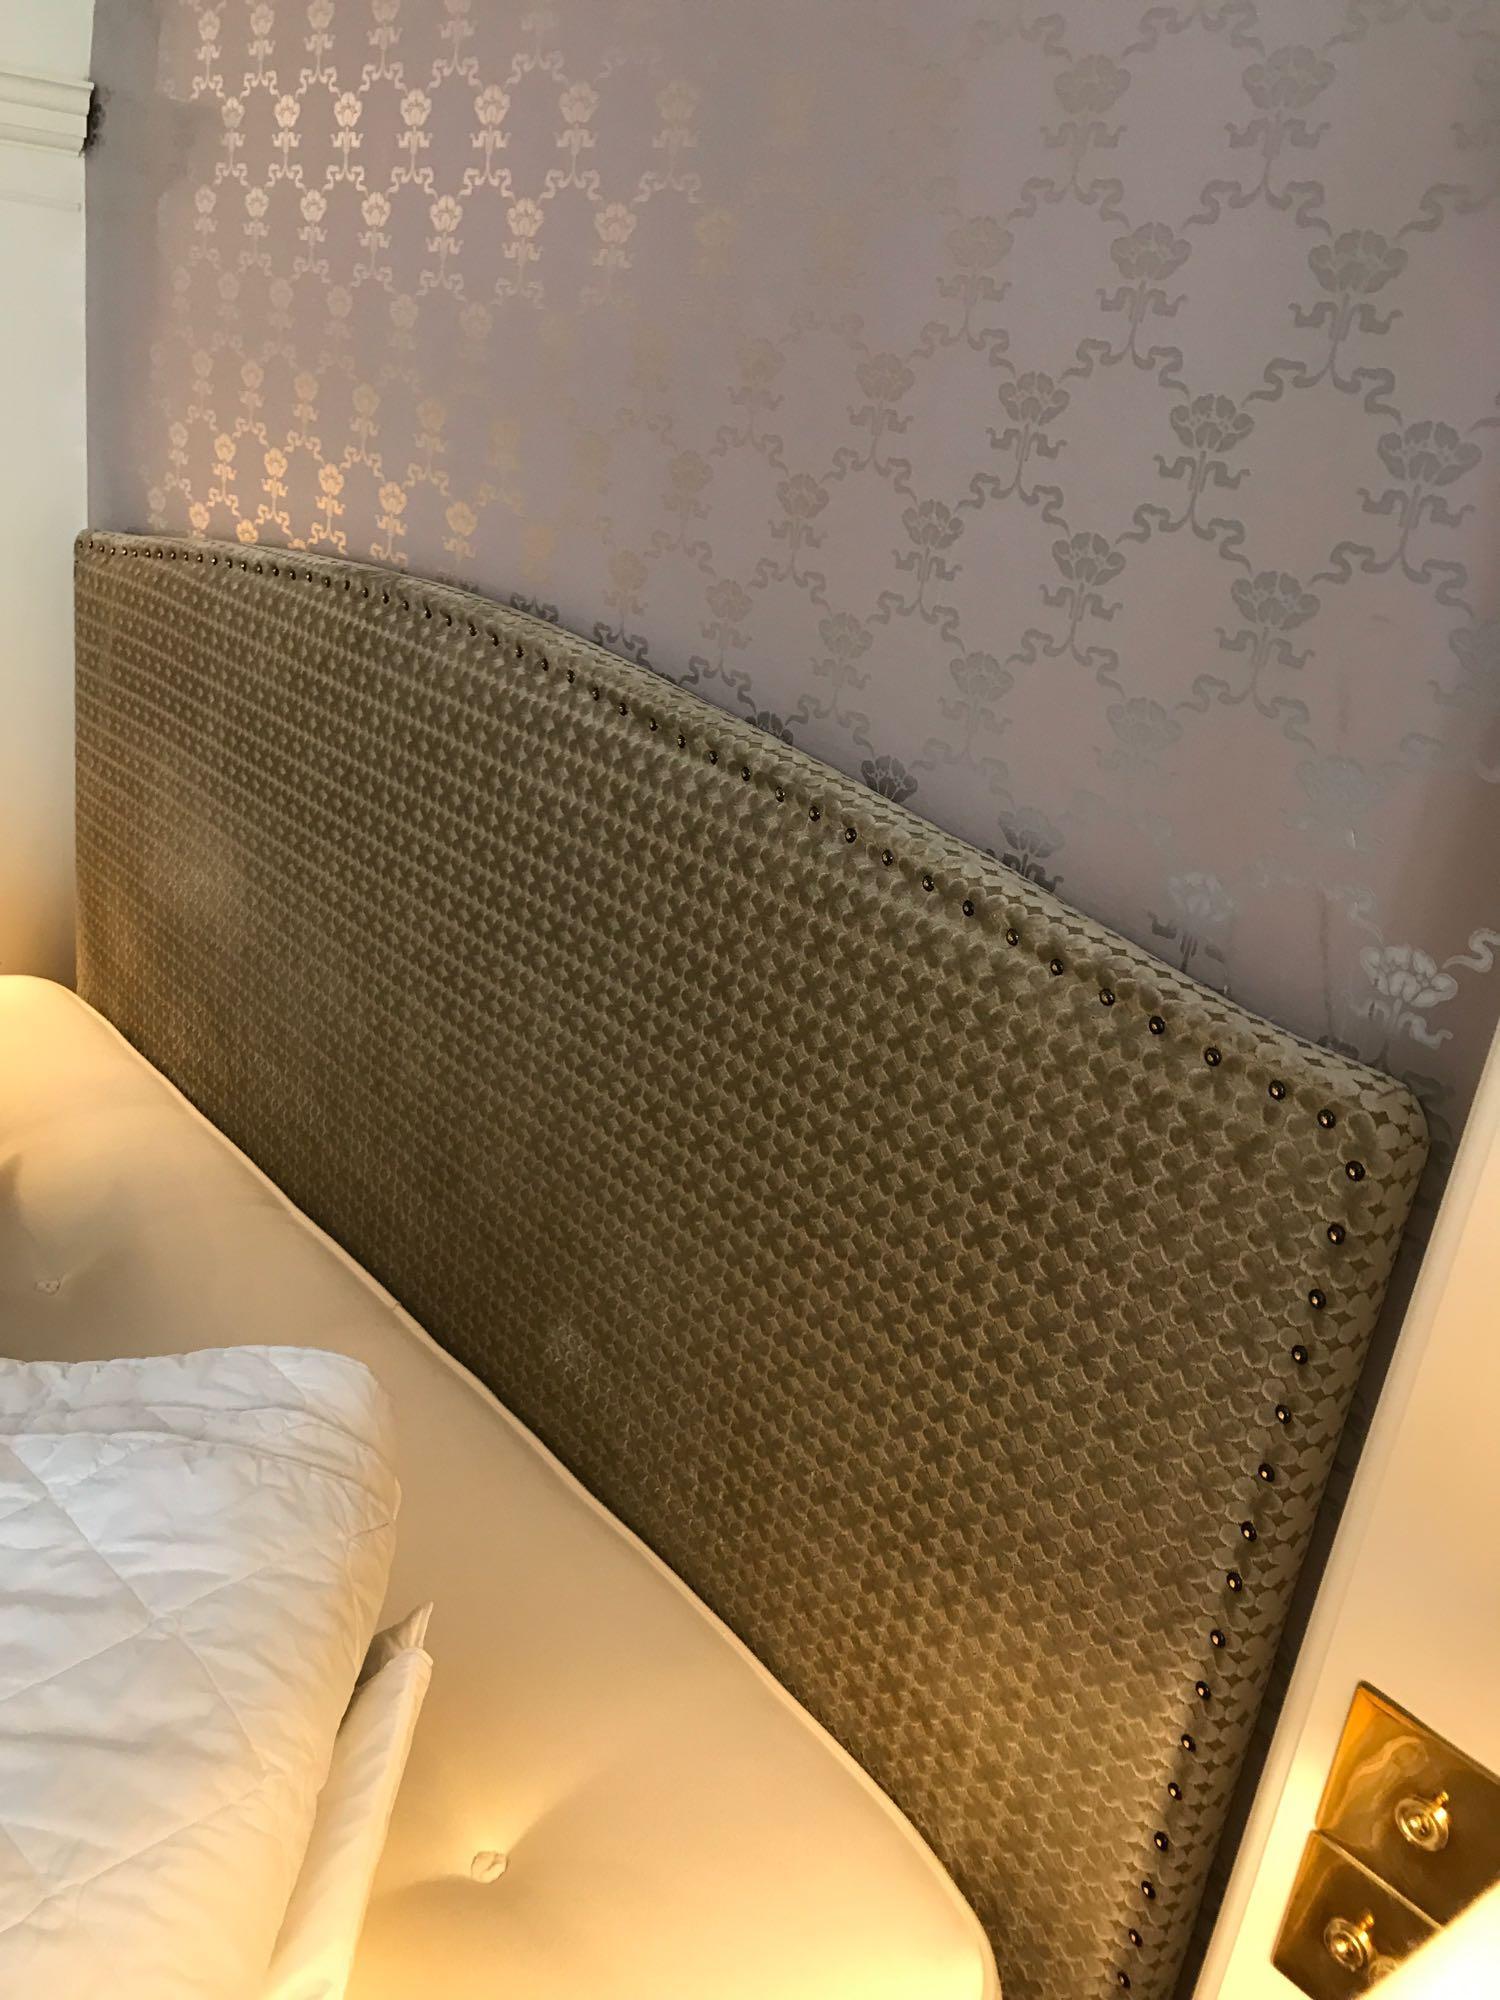 Headboard, Handcrafted With Nail Trim And Padded Textured Woven Upholstery (Room 431) - Image 2 of 2